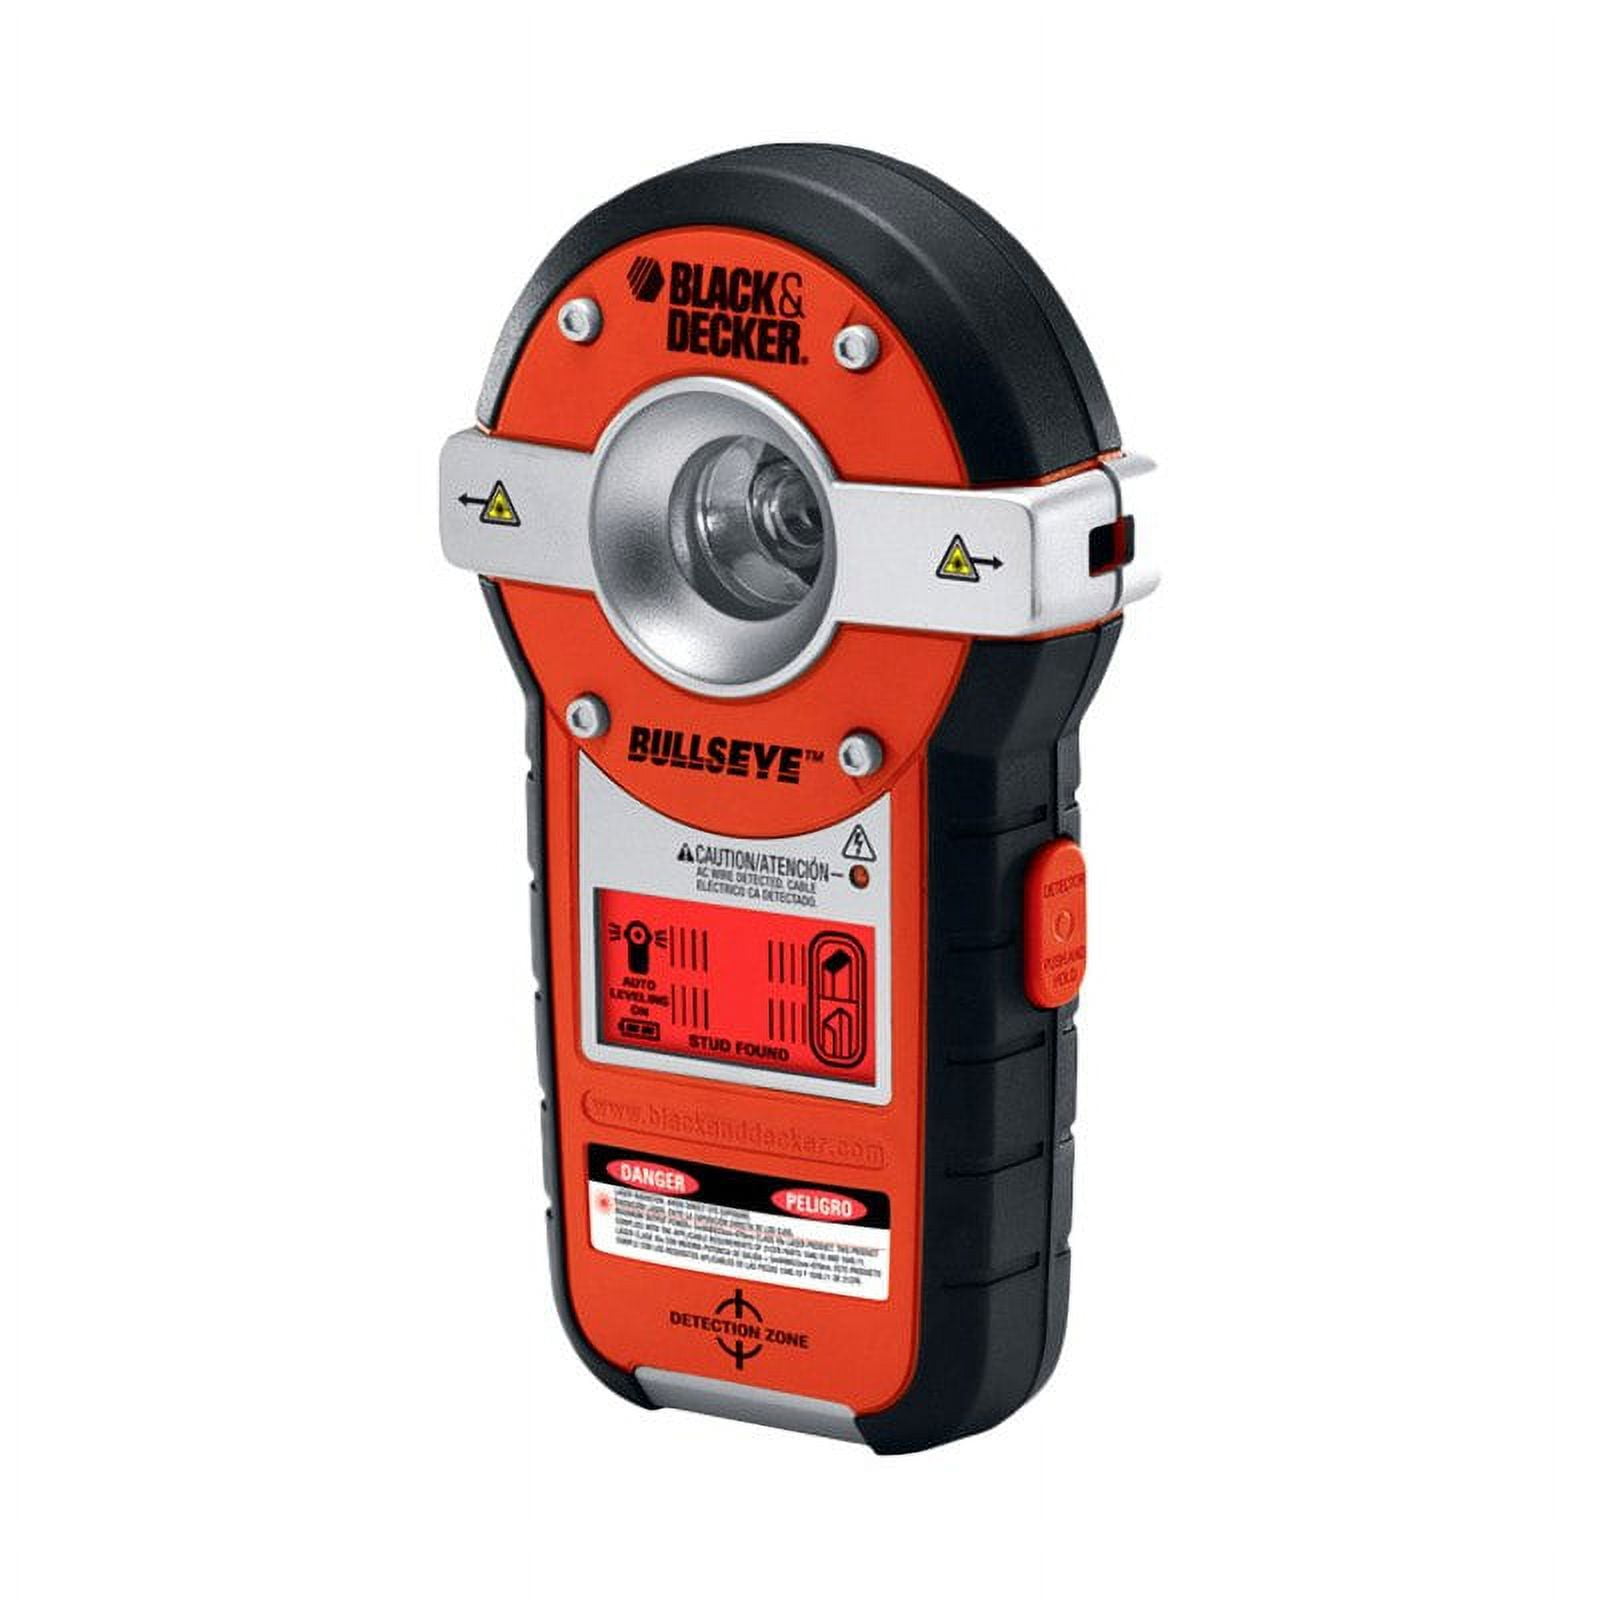 BLACK+DECKER Stubby Small Hammer, 8oz (BDHT54001) and BLACK+DECKER Line  Laser, Auto-leveling with Stud Finder (BDL190S) 